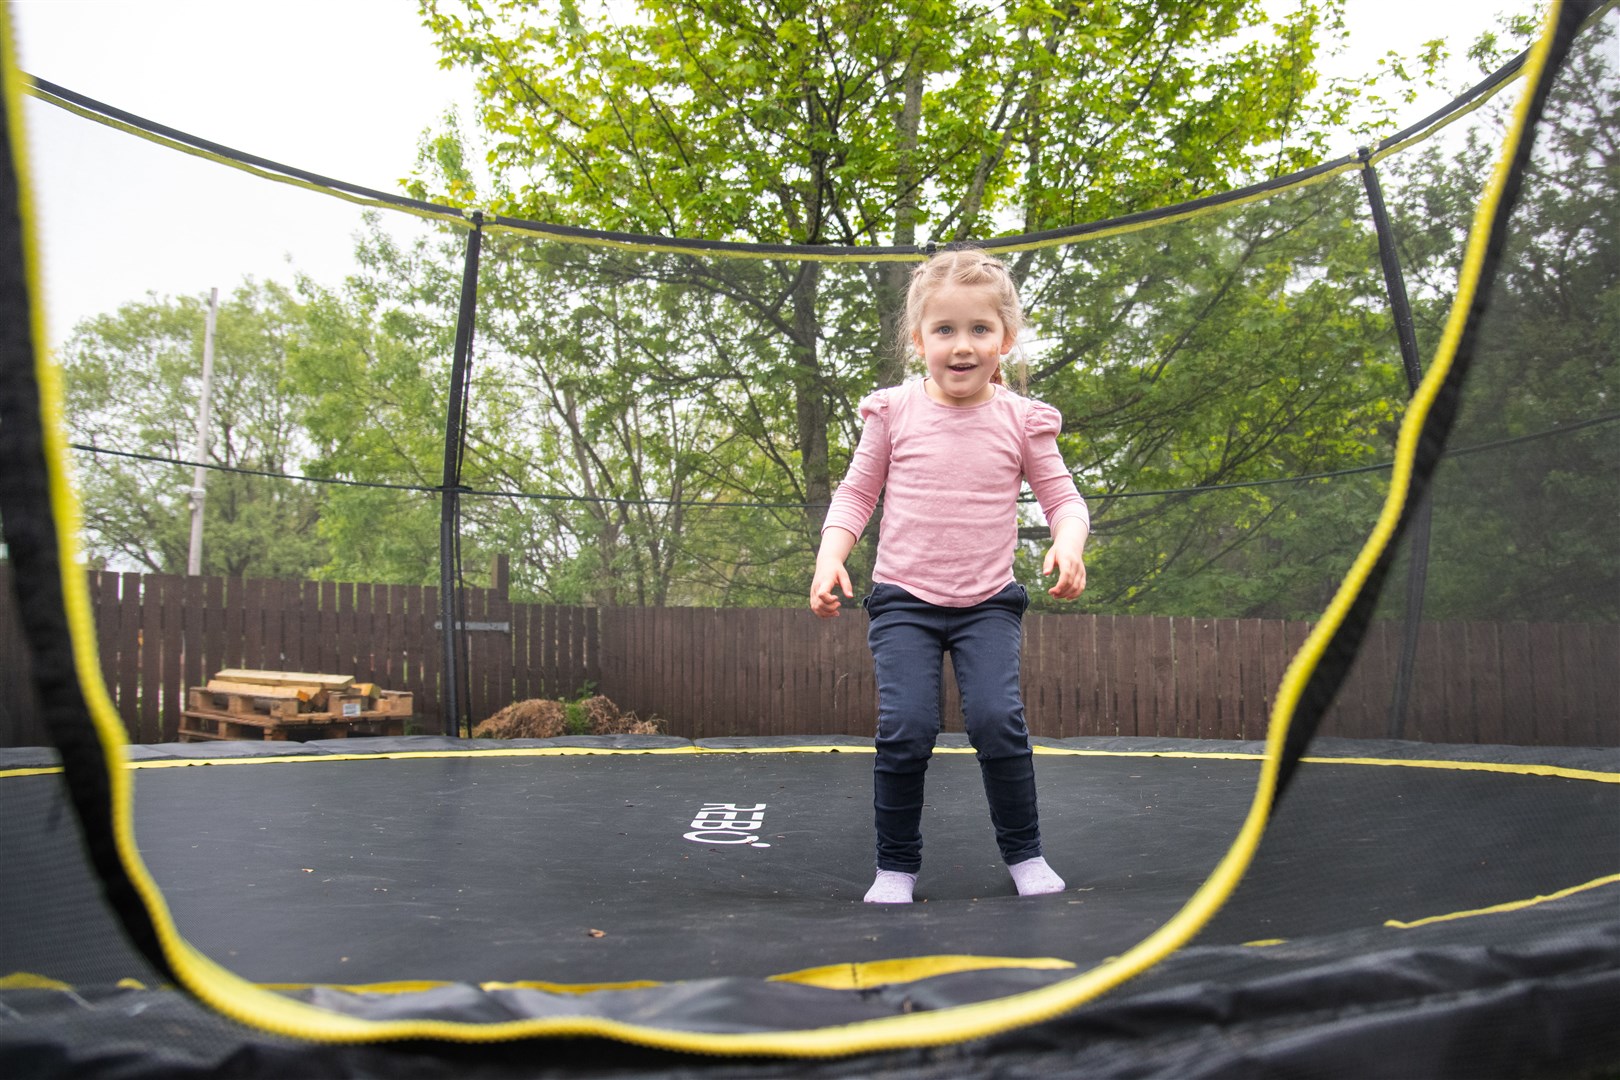 Robyn Weir enjoyed playing on the garden's trampoline. Picture: Daniel Forsyth